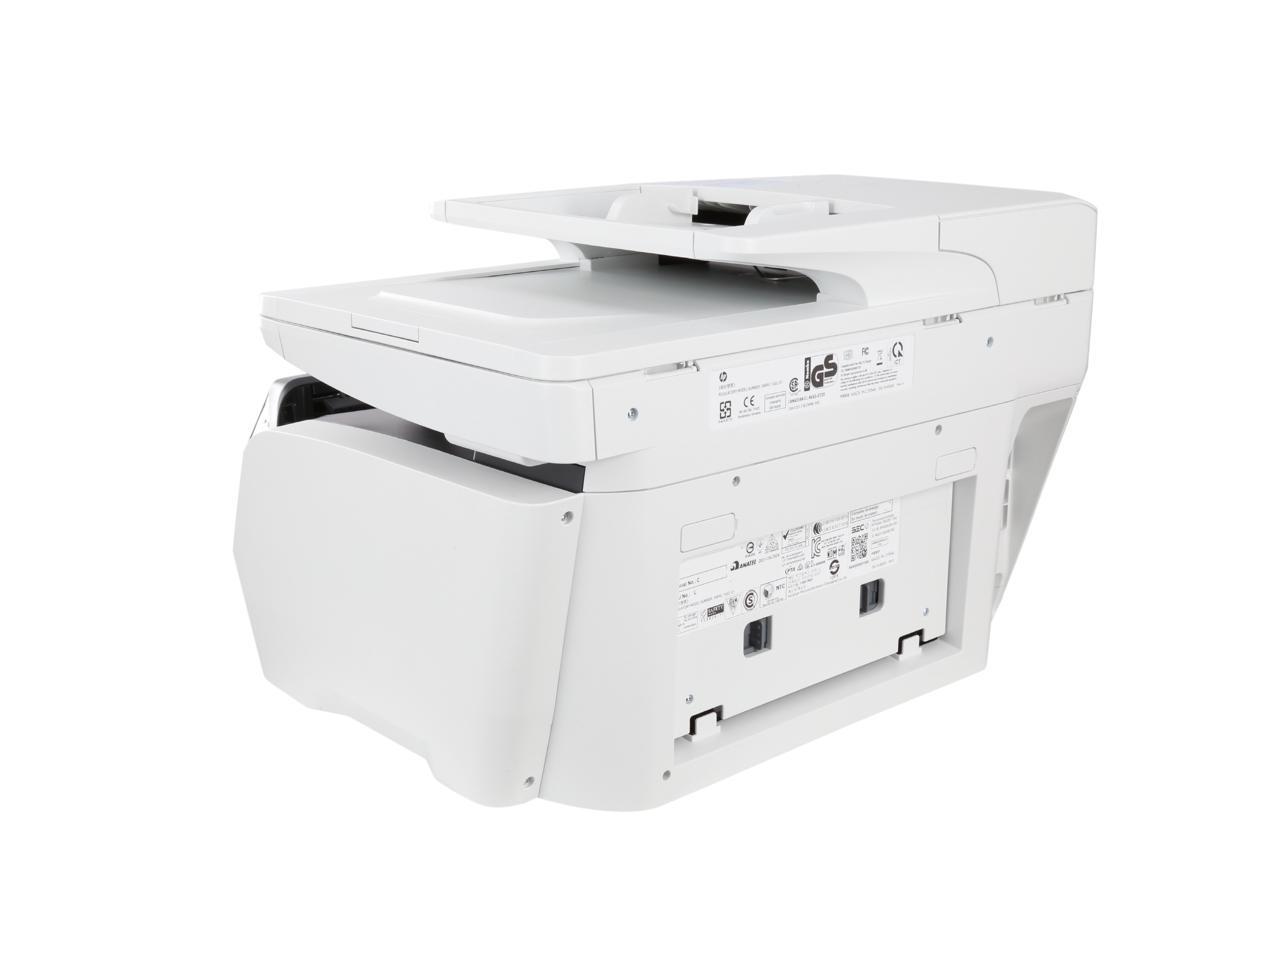 print one sided on mac for hp office jet pro 8720